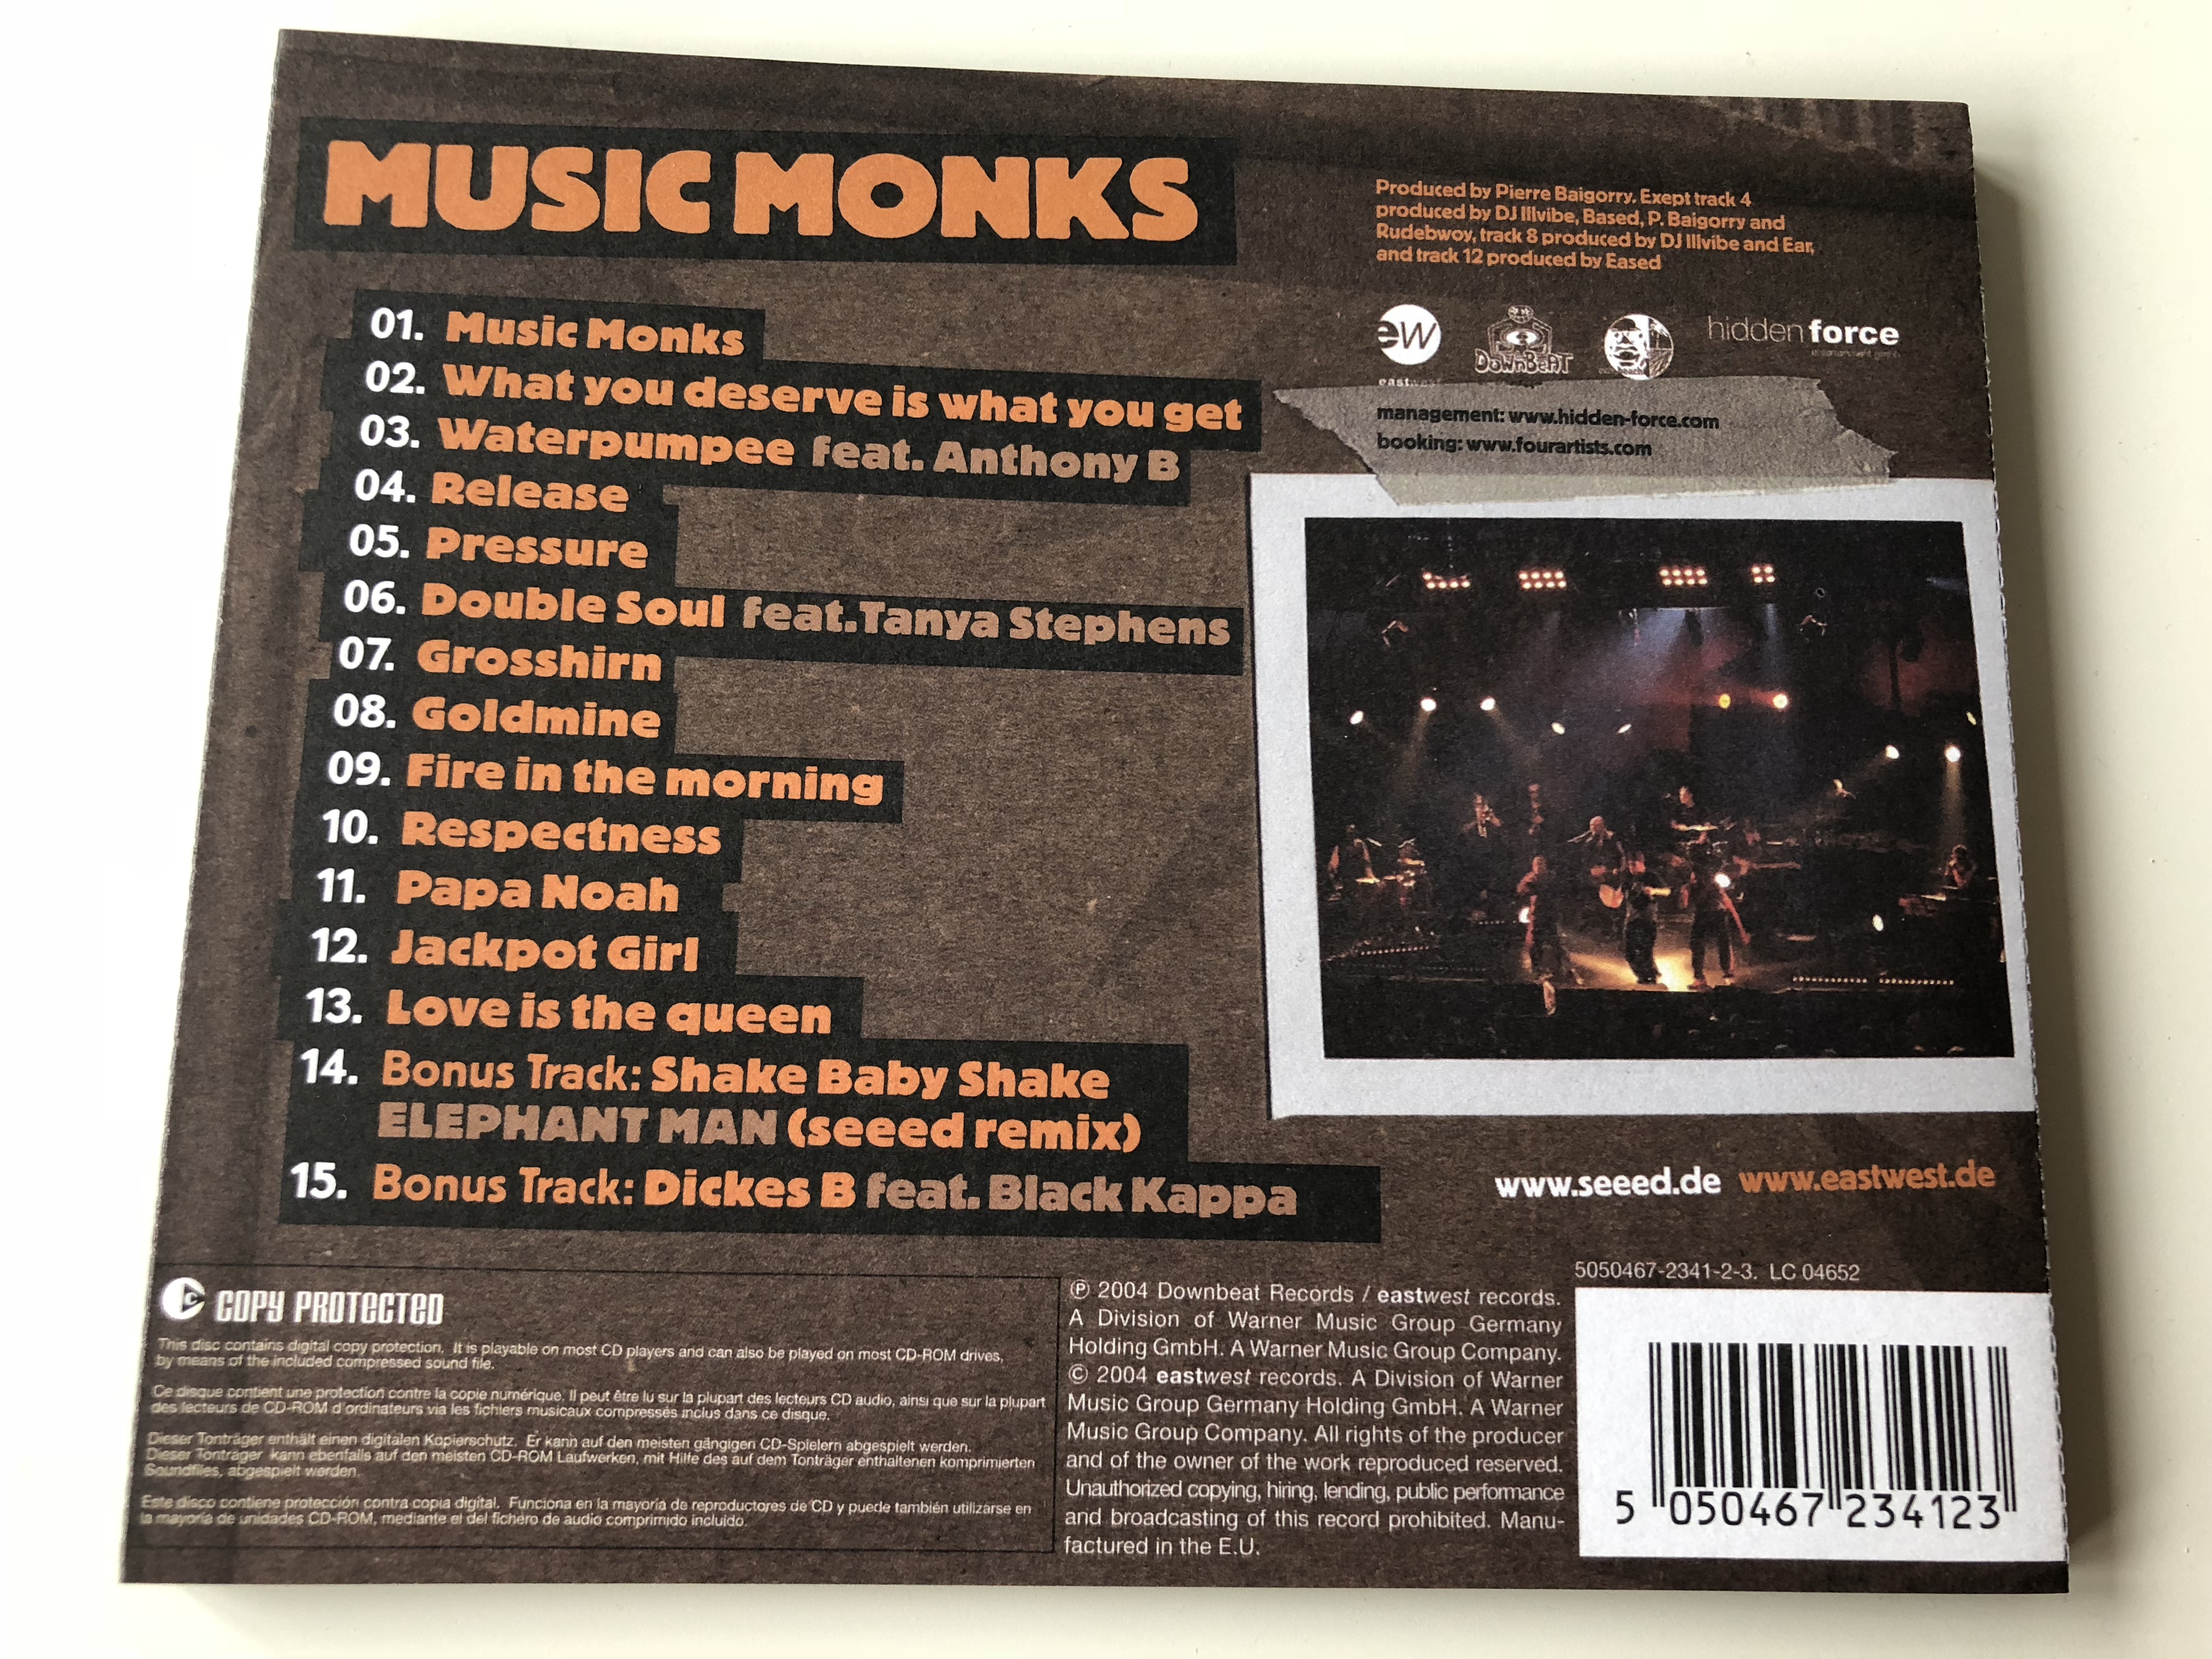 seed-music-monks-what-you-desereve-is-what-you-get-pressure-goldmine-fire-in-the-morning-audio-cd-2004-downbeat-records-2-.jpg